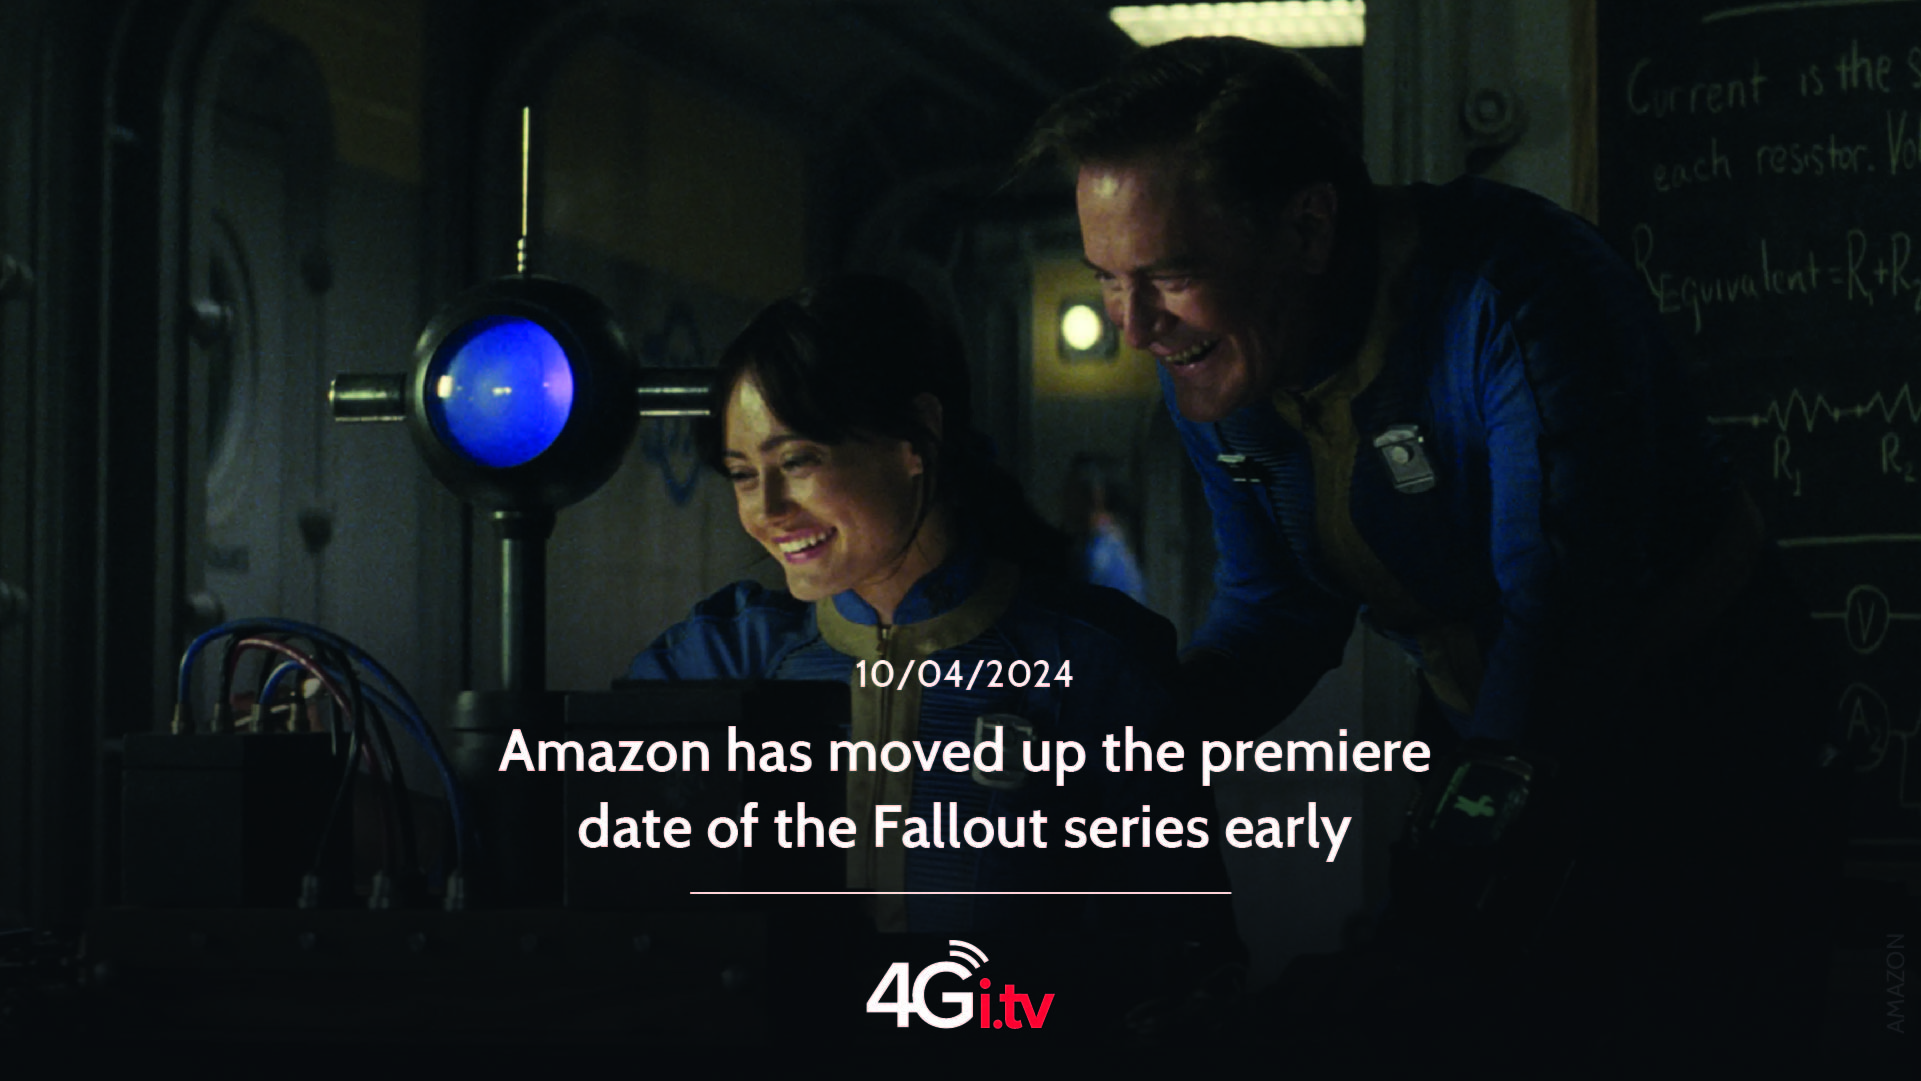 Lesen Sie mehr über den Artikel Amazon has moved up the premiere date of the Fallout series early